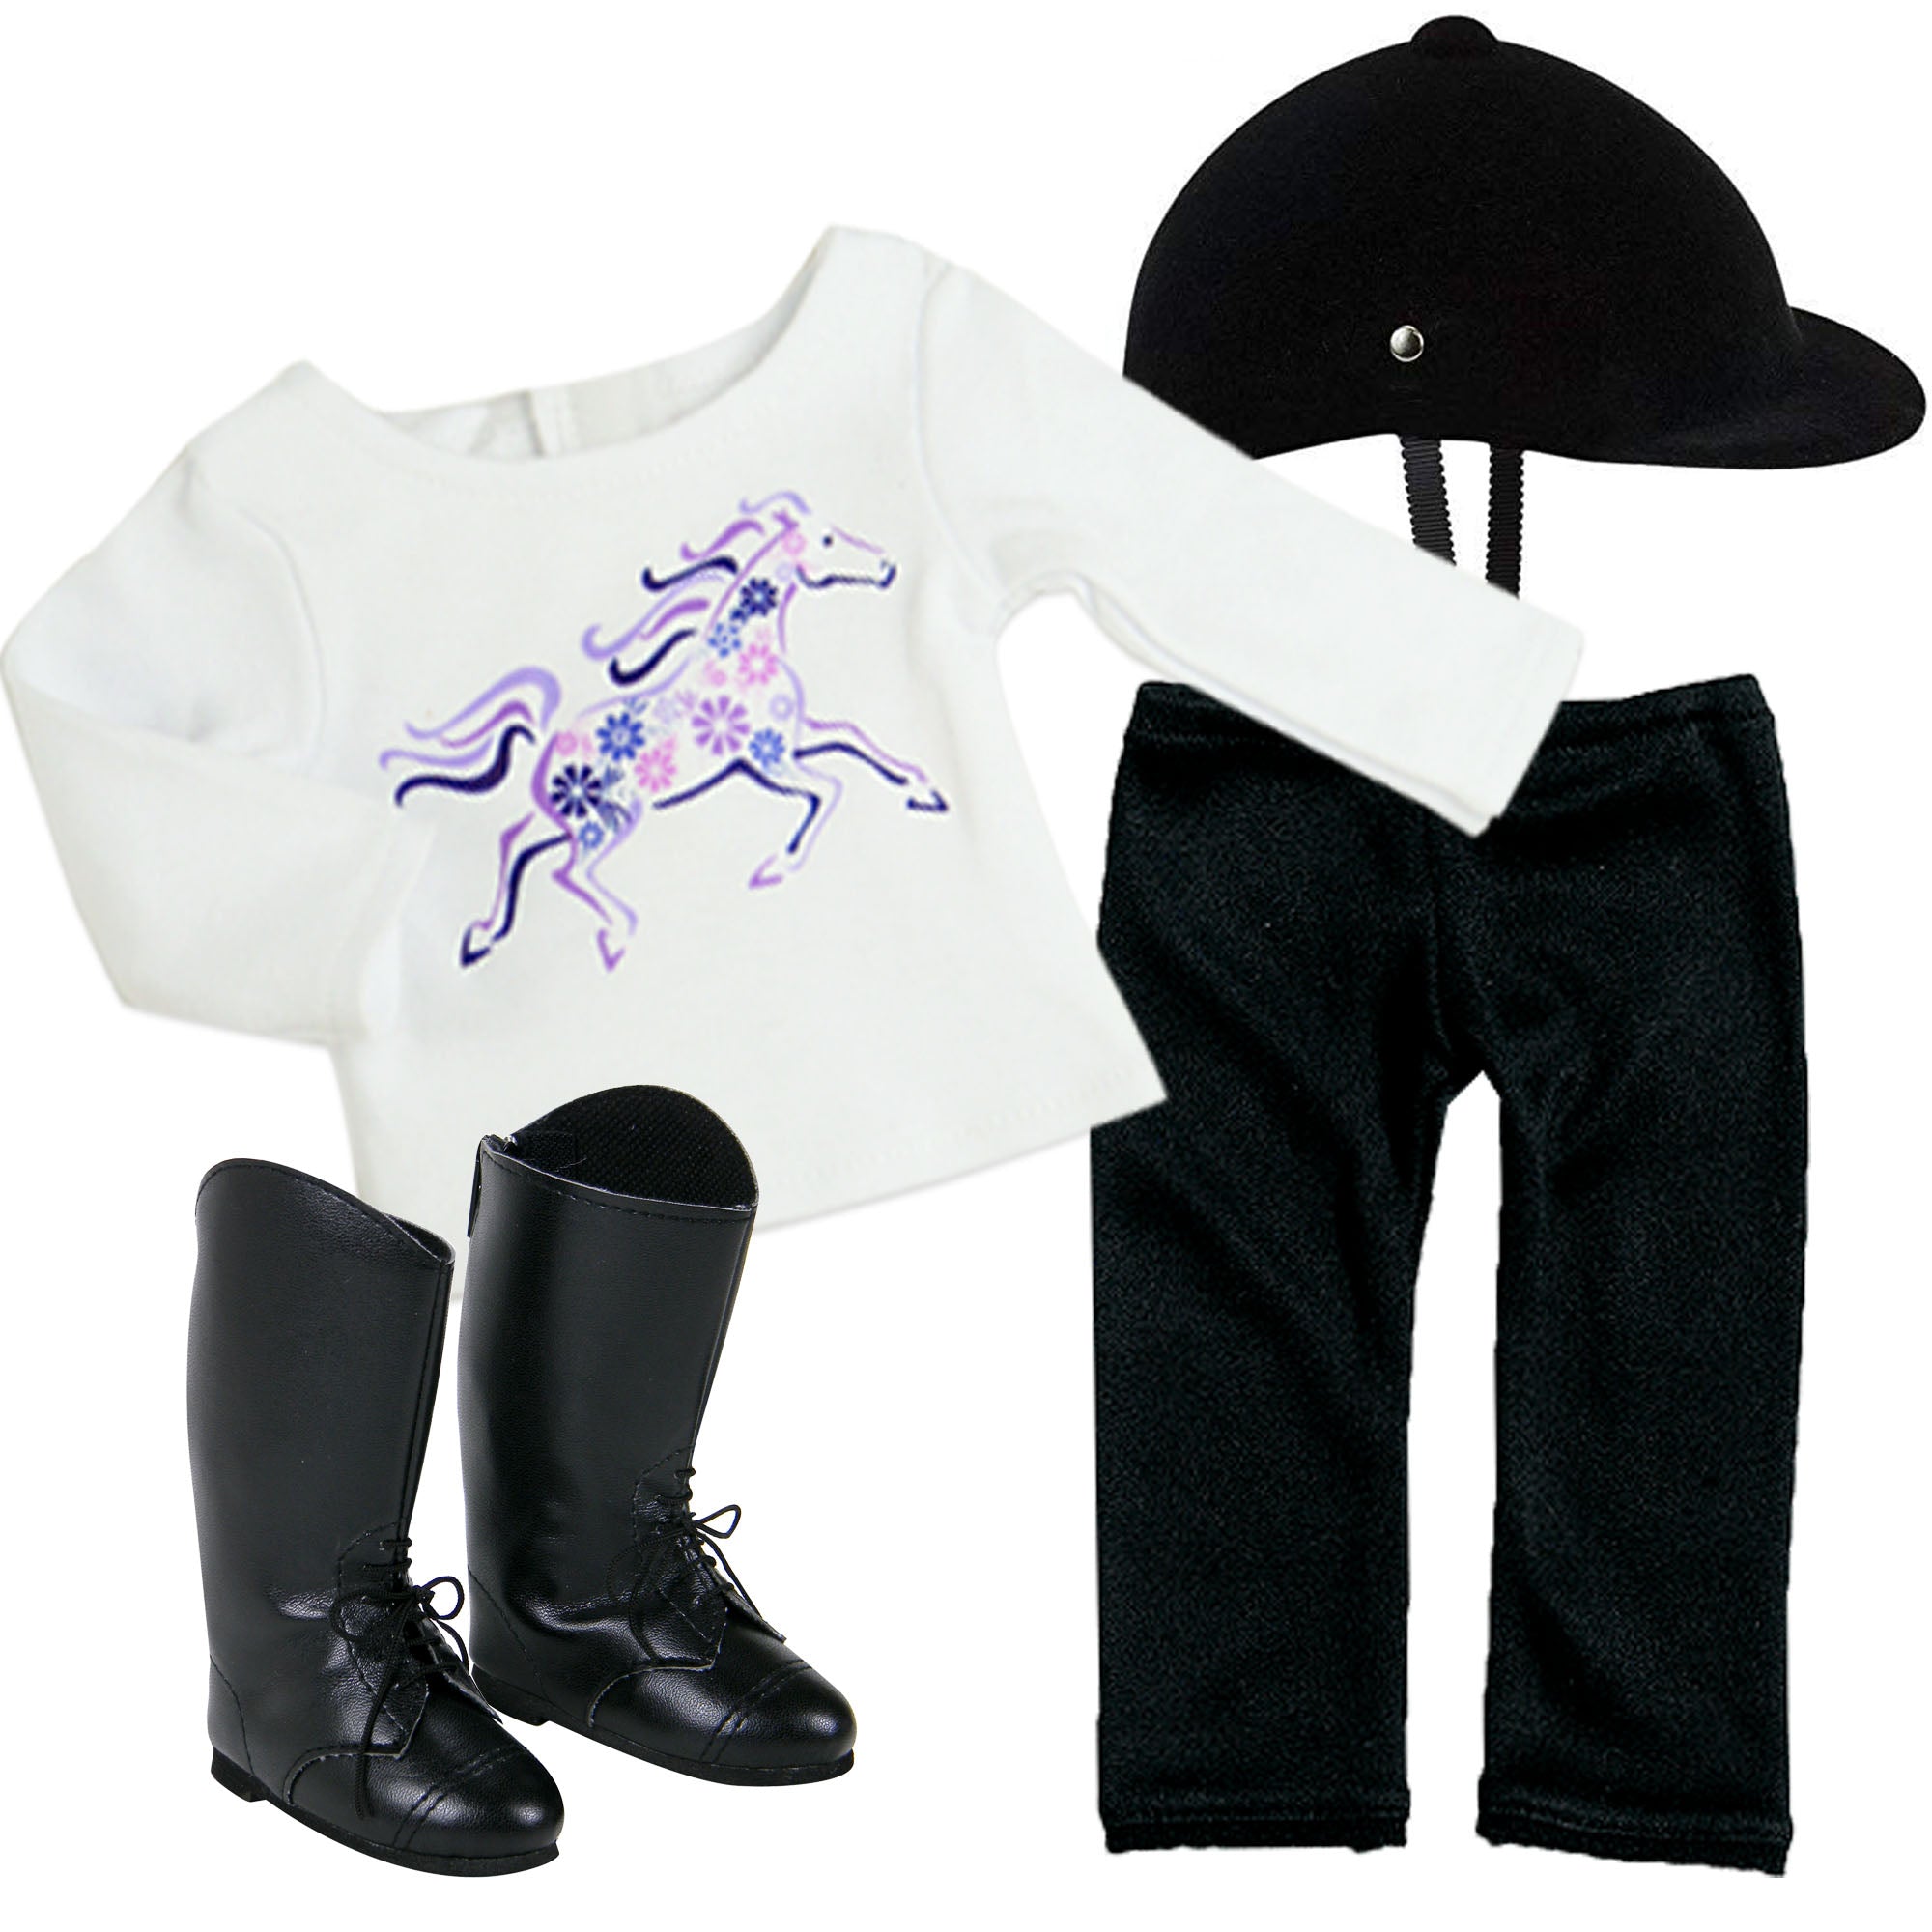 Sophia's 4 Piece Horseback Riding Outfit with Riding Boots Set for 18'' Dolls, Black